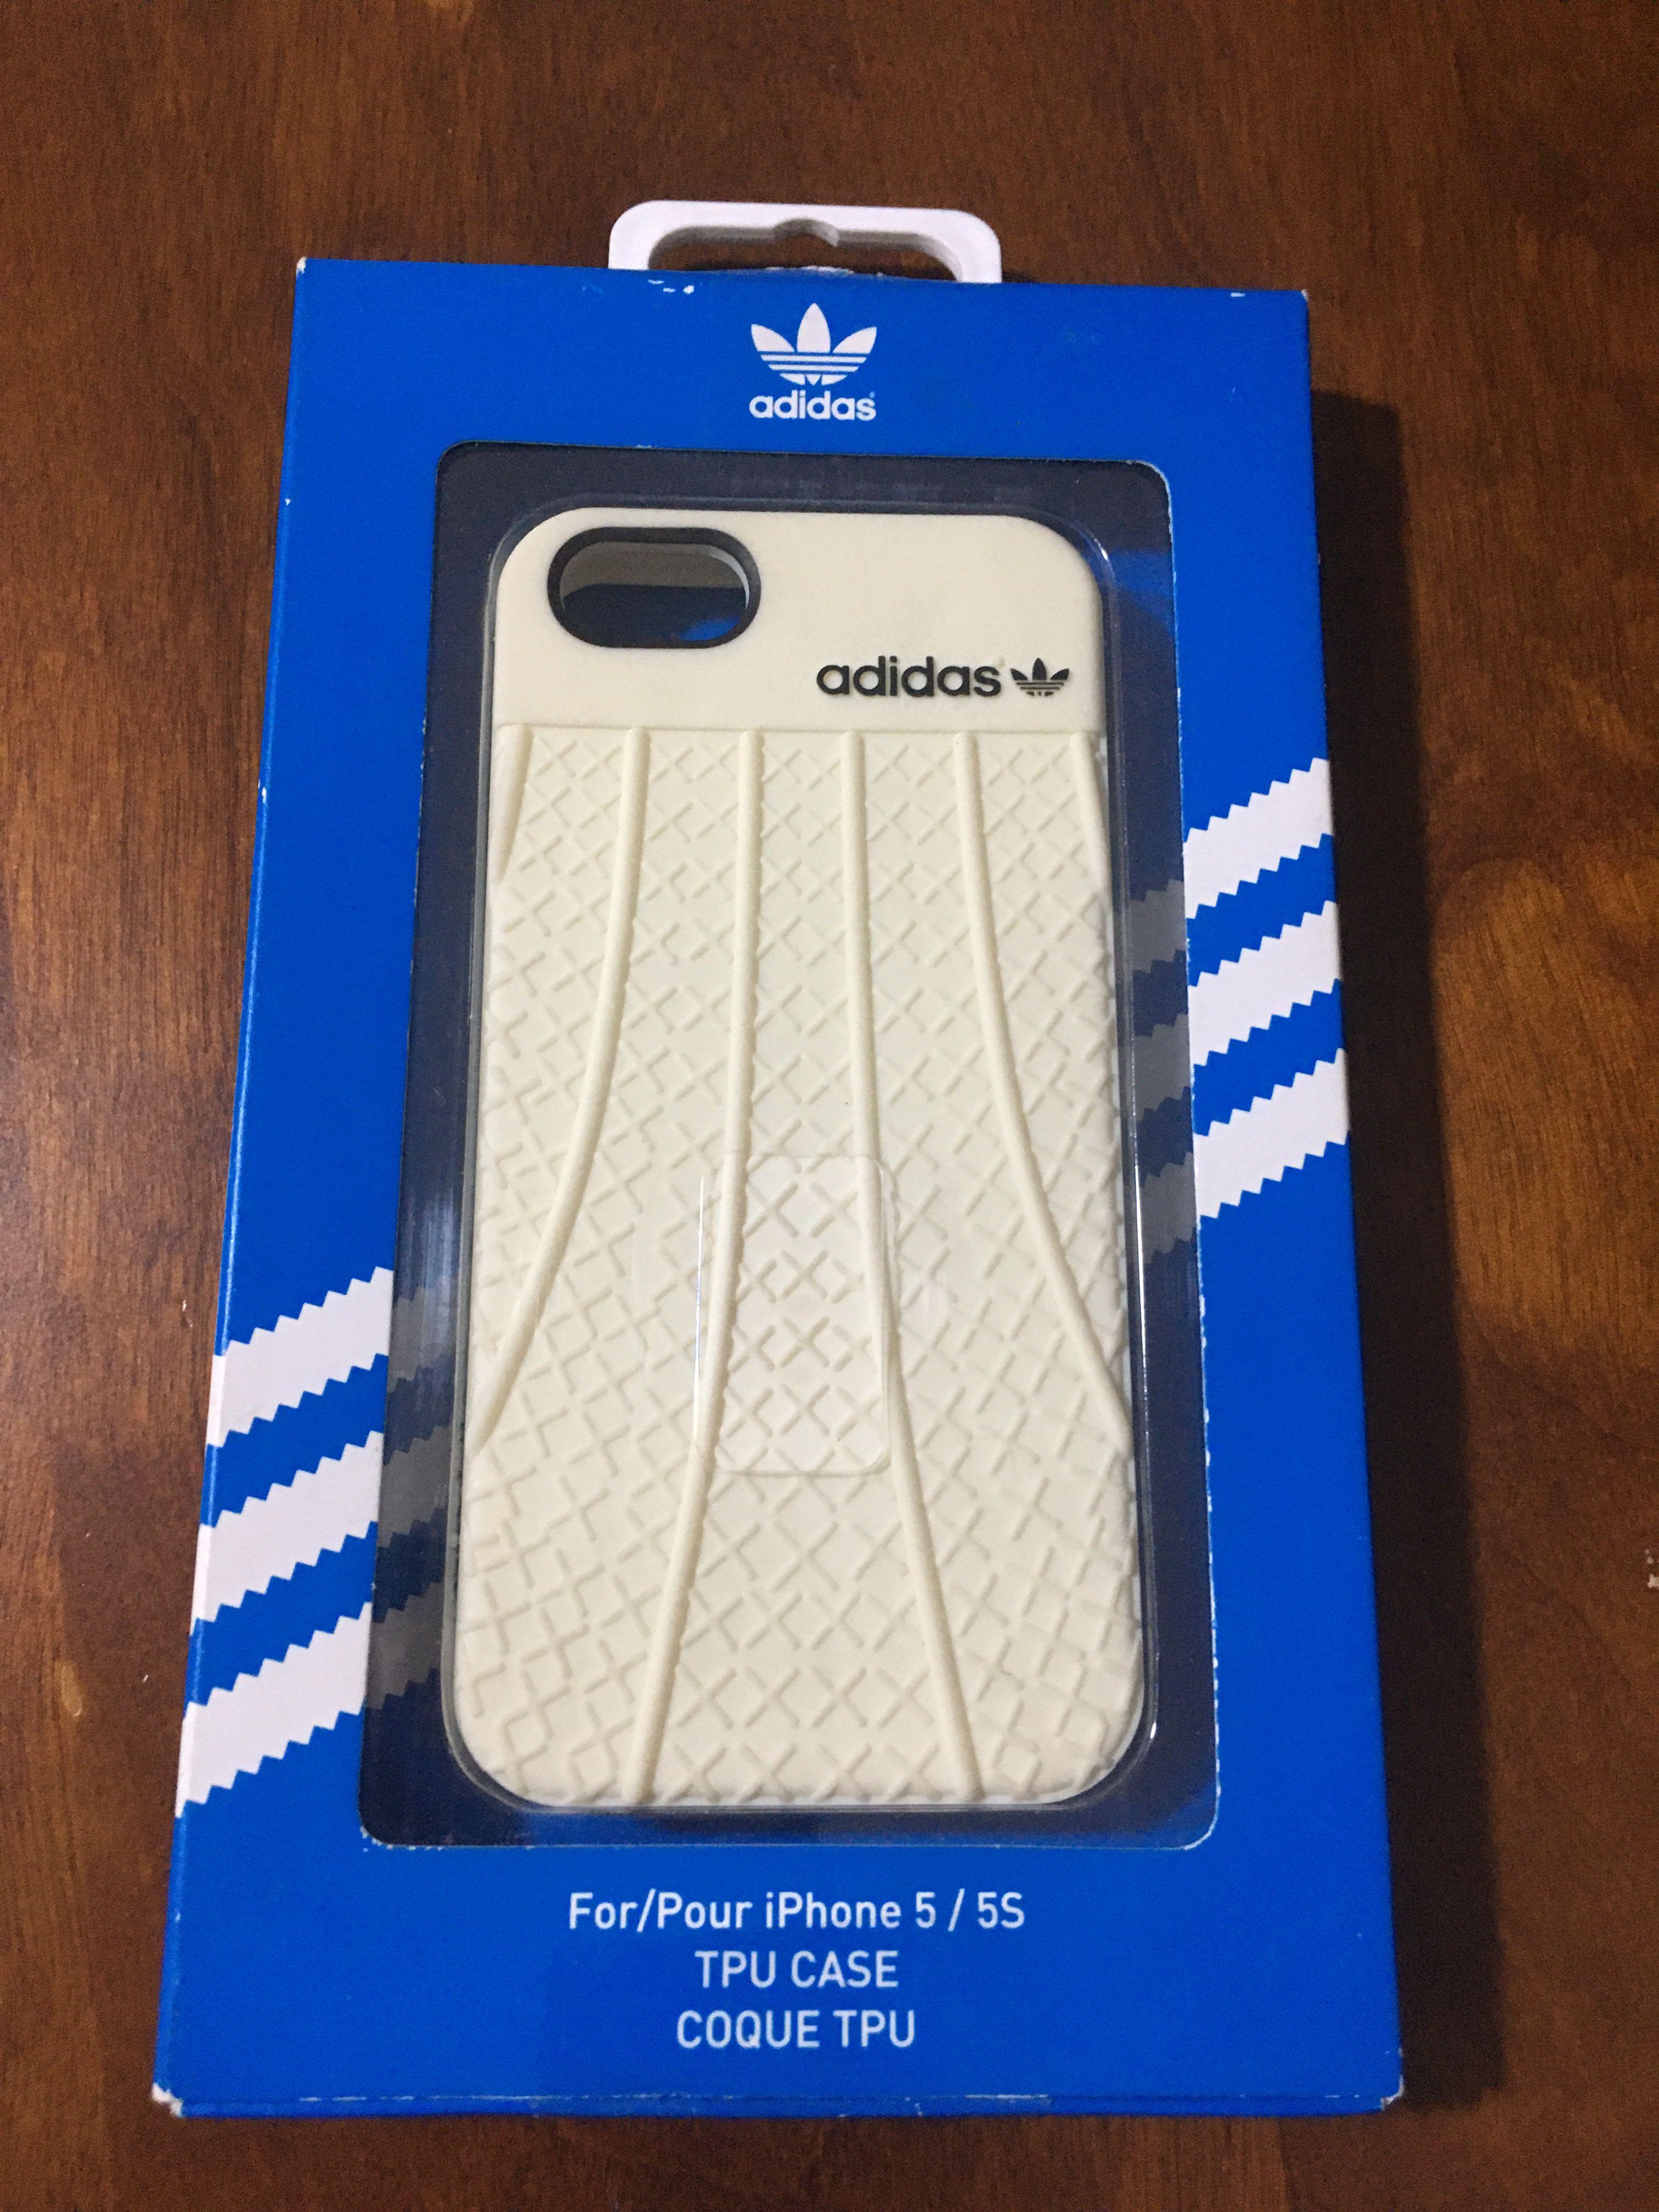 Adidas Iphone 5 5s Se Casing Mobile Phones Tablets Mobile Tablet Accessories Cases Sleeves On Carousell